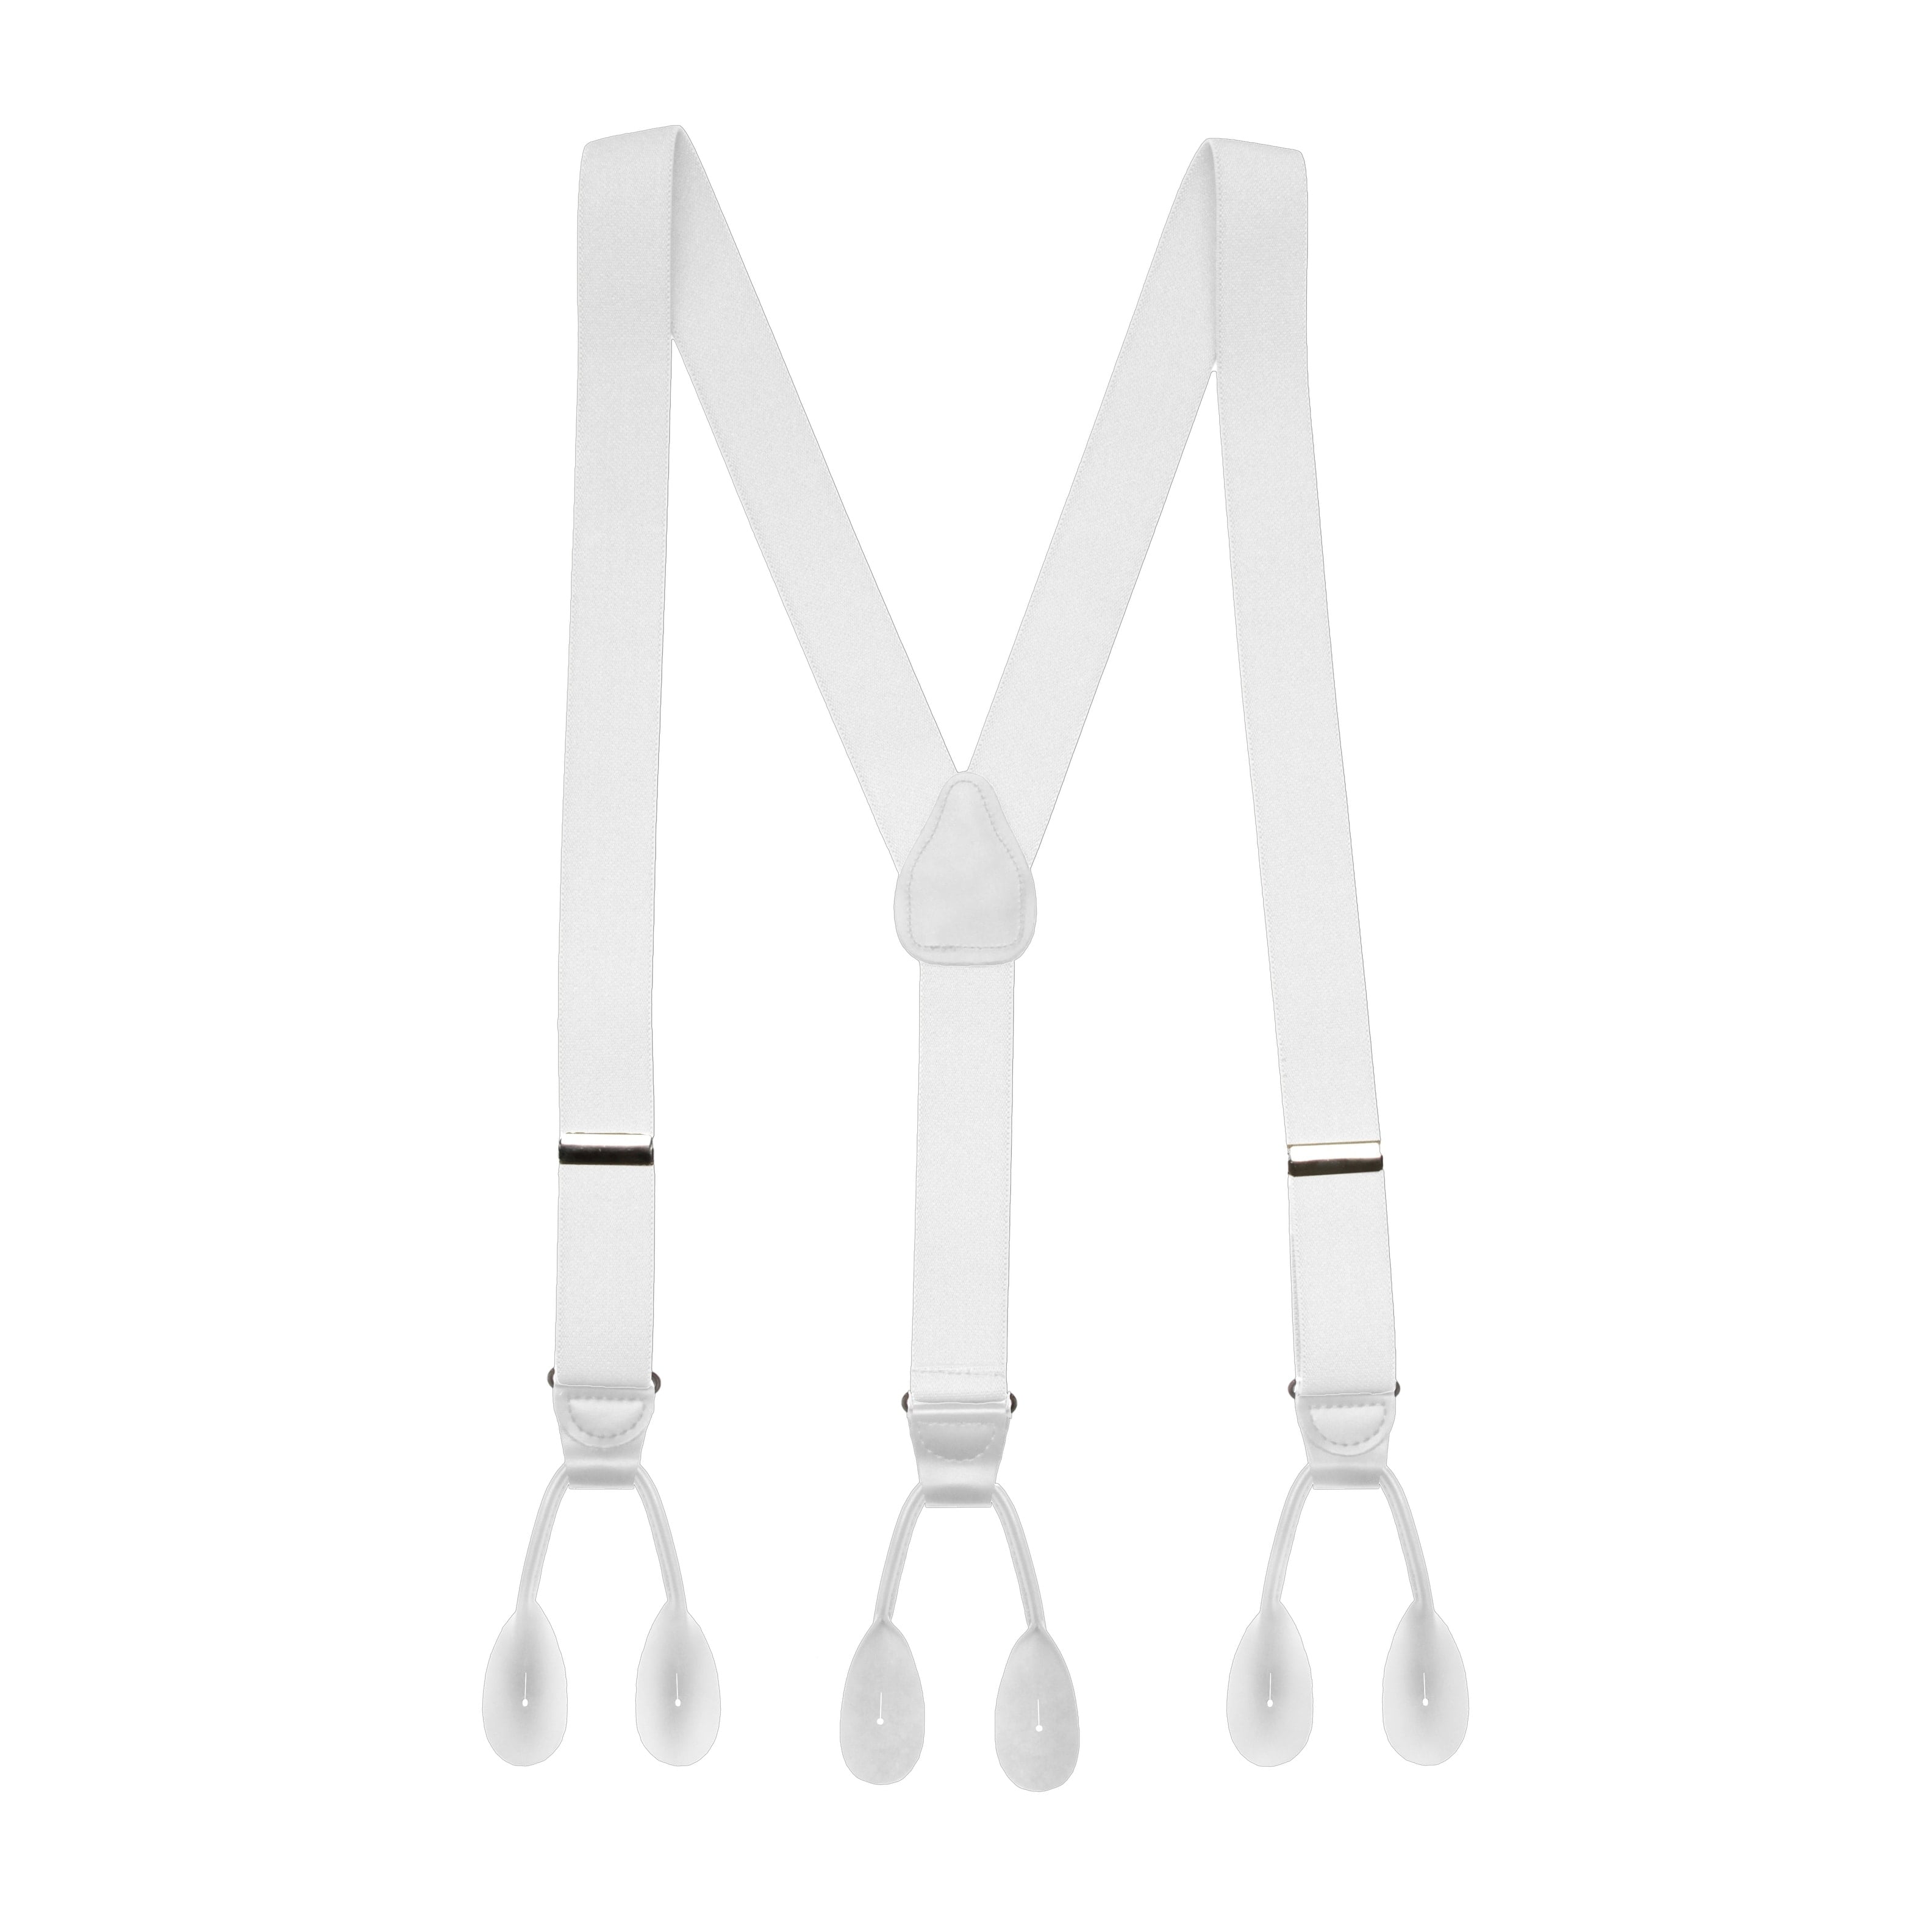 HoldEm Suspenders for Men Y-Back Leather Trimmed Button End Tuxedo Suspenderss Many colors and designs 